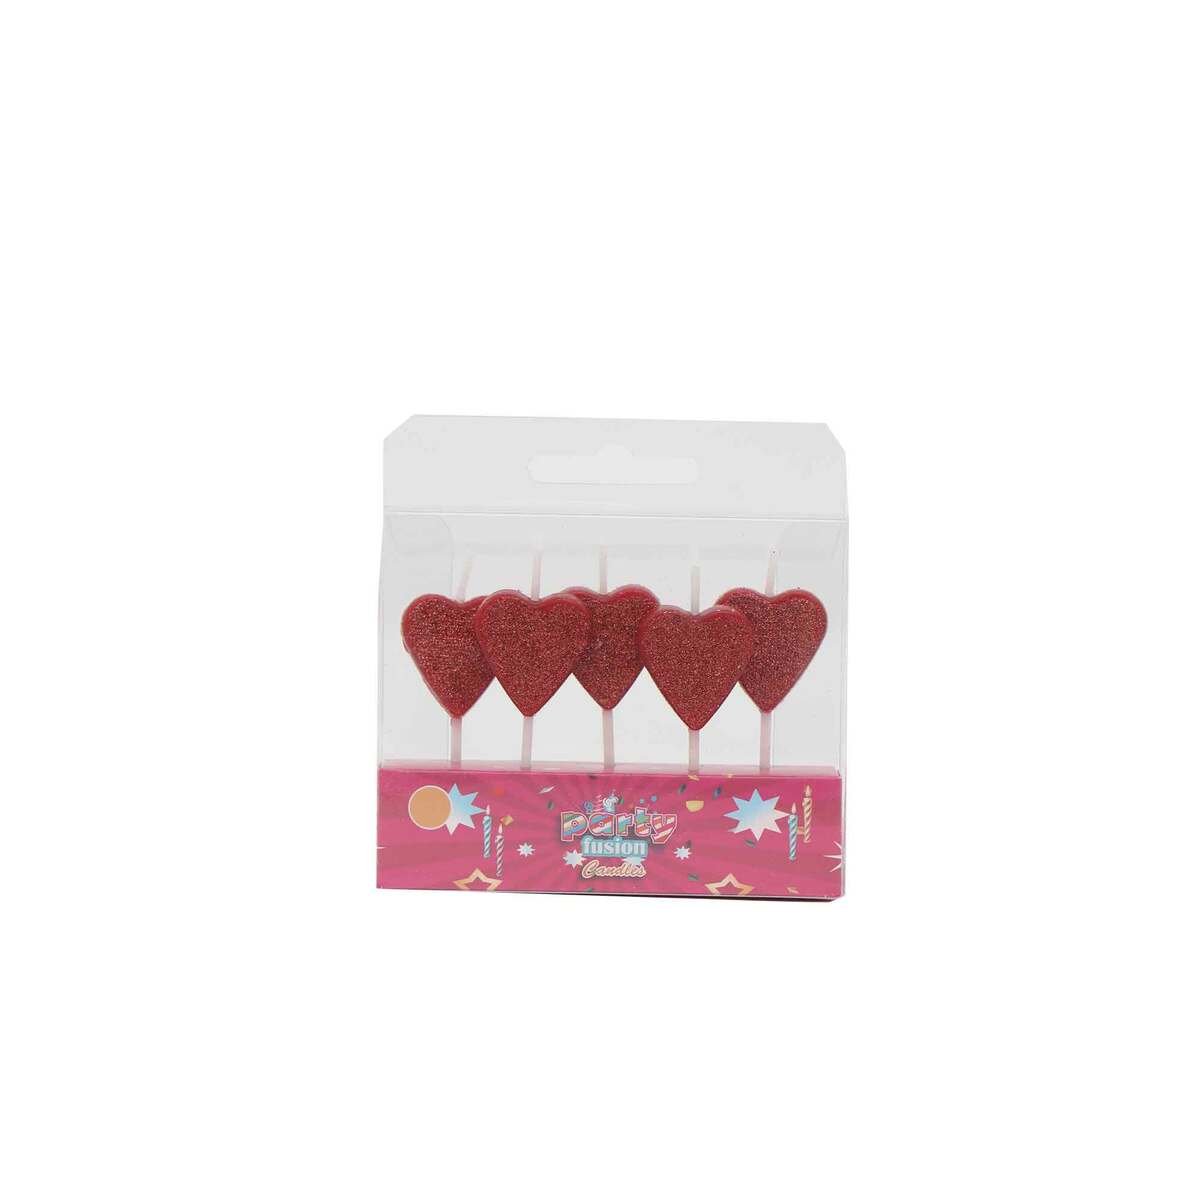 Party Fusion Heart Shaped Candles 5's